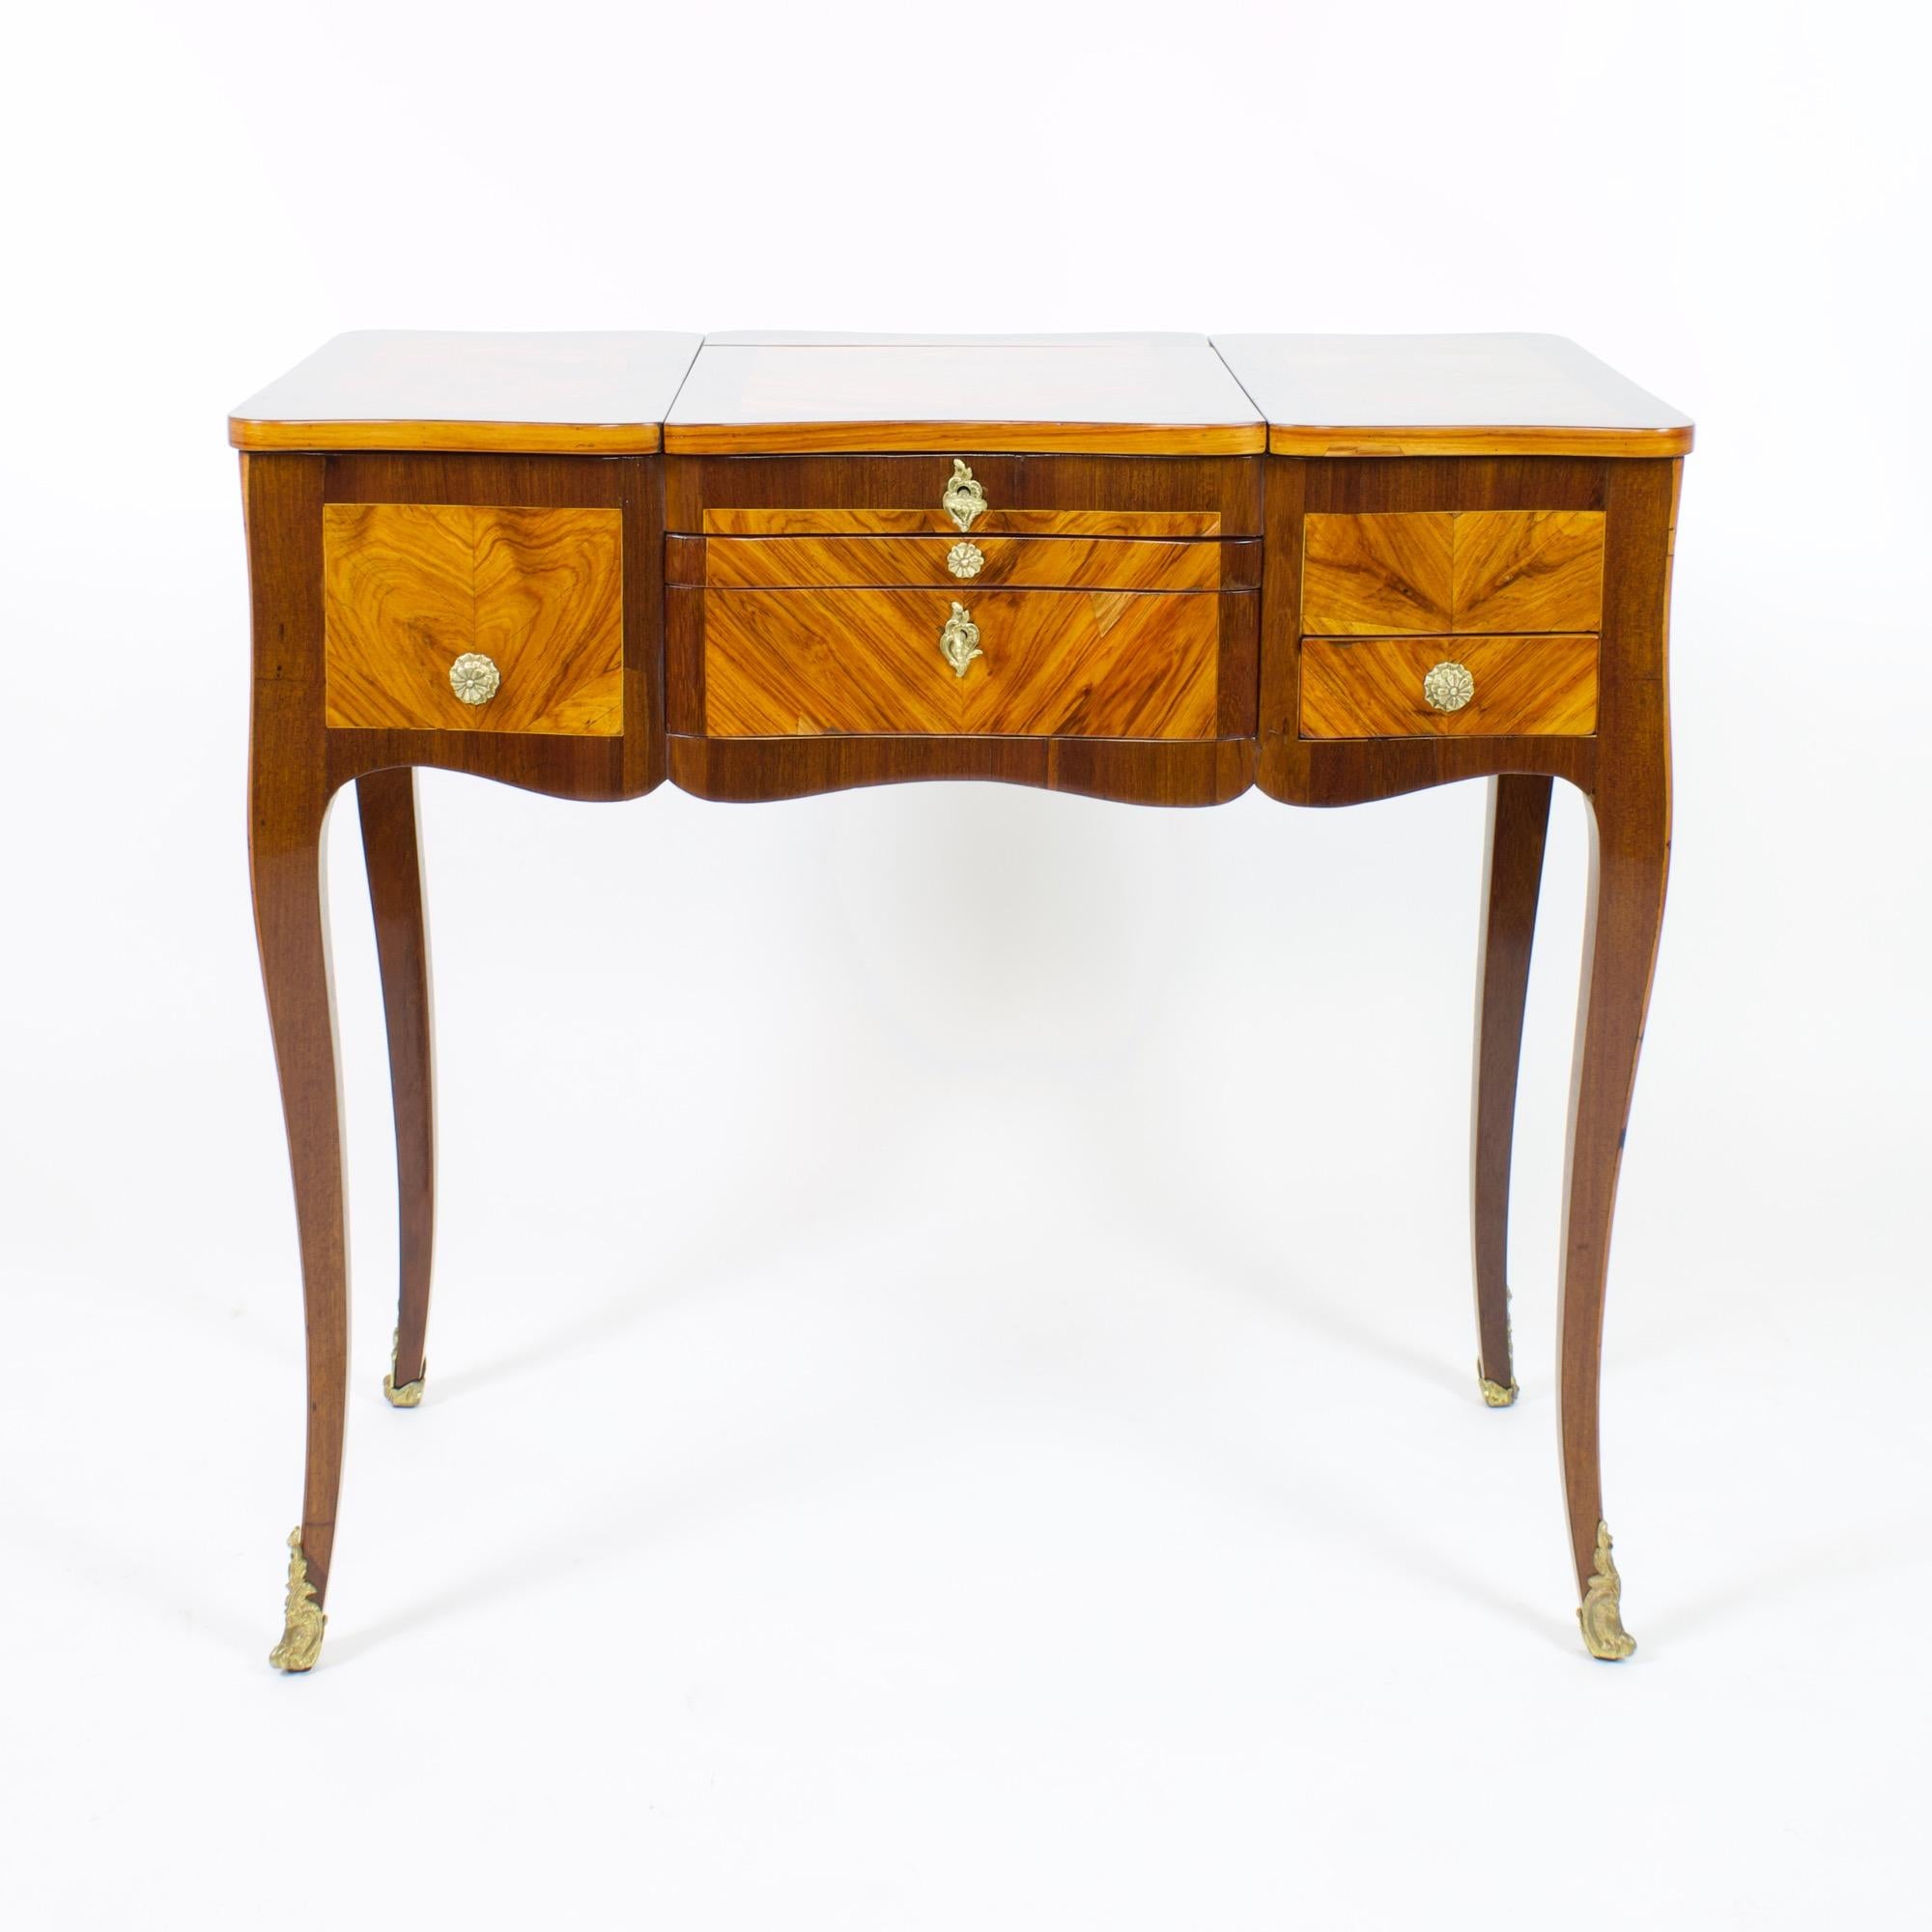 18th century French Louis XV marquetry dressing table or so-called Coiffeuse

18th century Louis XV vanity dressing table or coiffeuse standing on four slender tapering cabriole legs, all sides and top decorated with elaborate mirrored parquetry.